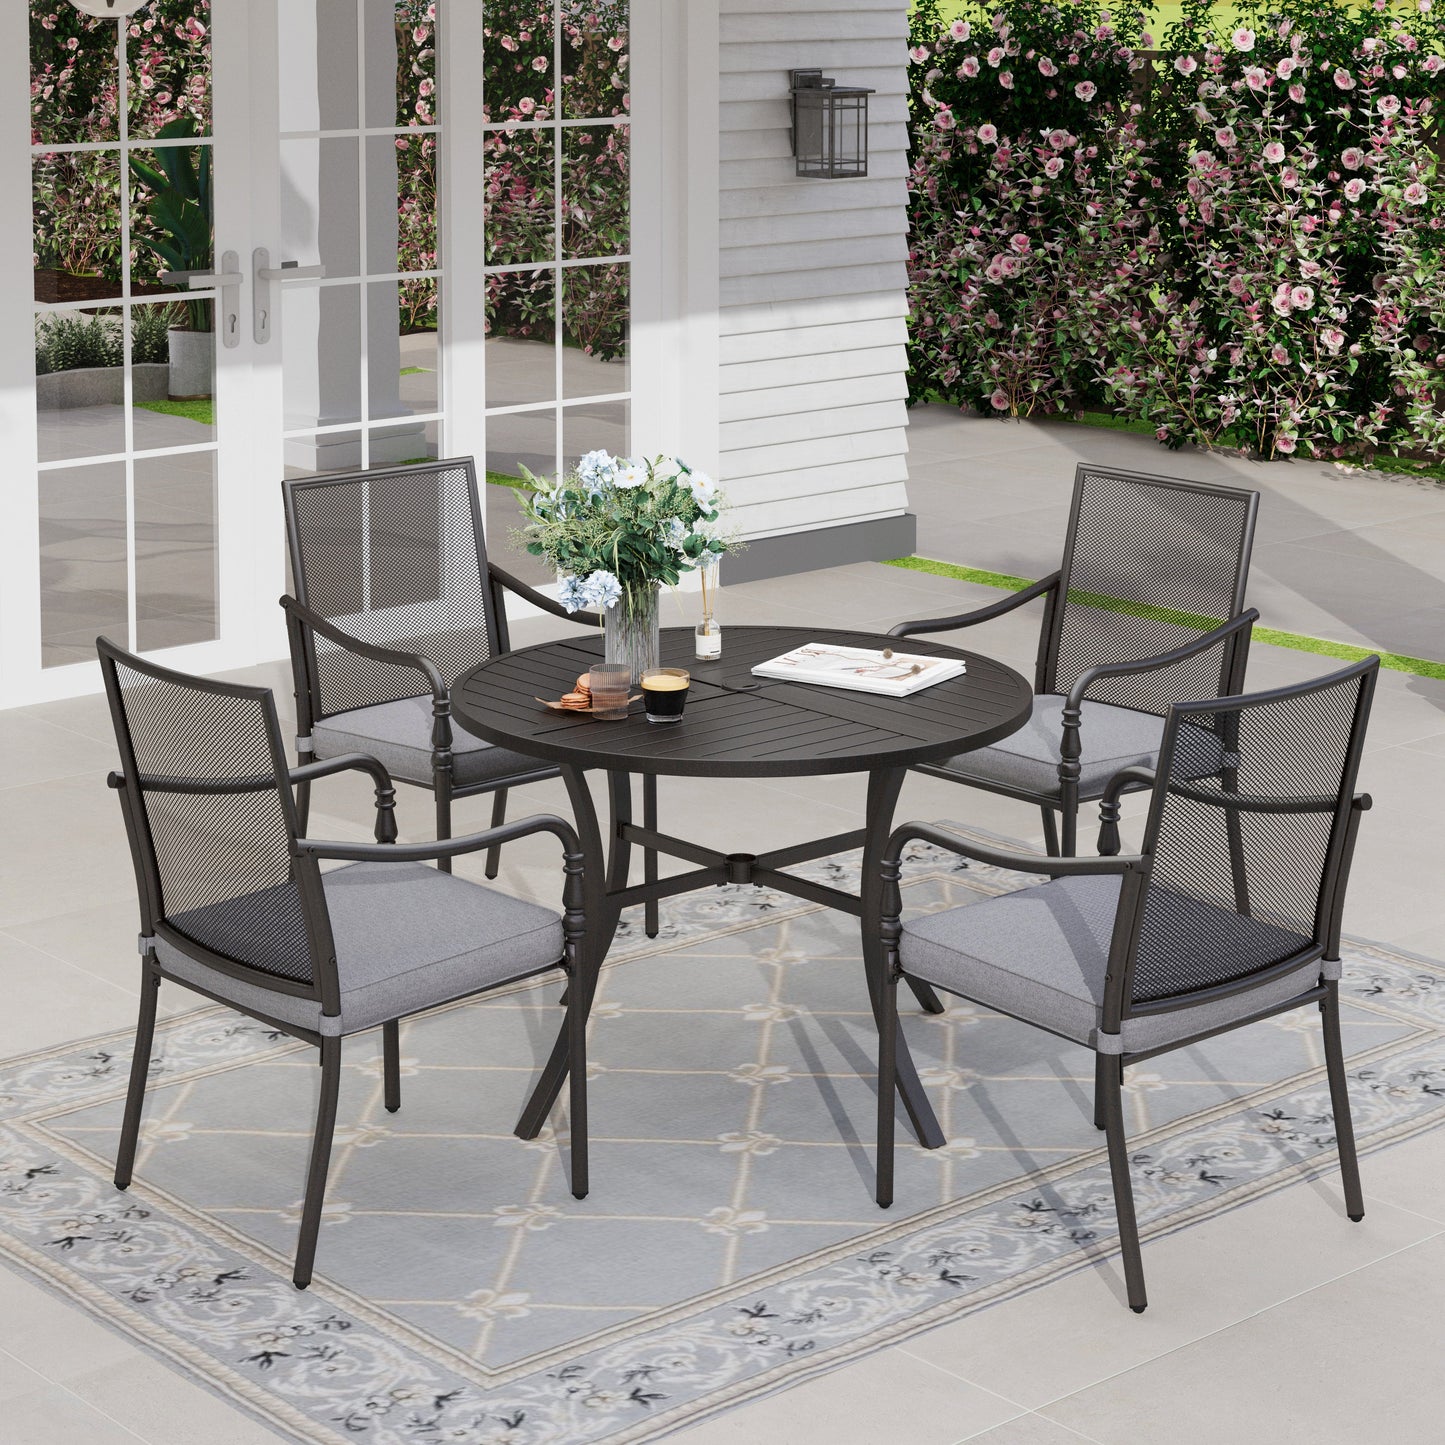 Sophia & William 9 Piece Patio Dining Set 82.6¡åMetal Table and 8 Red Textilene Chairs